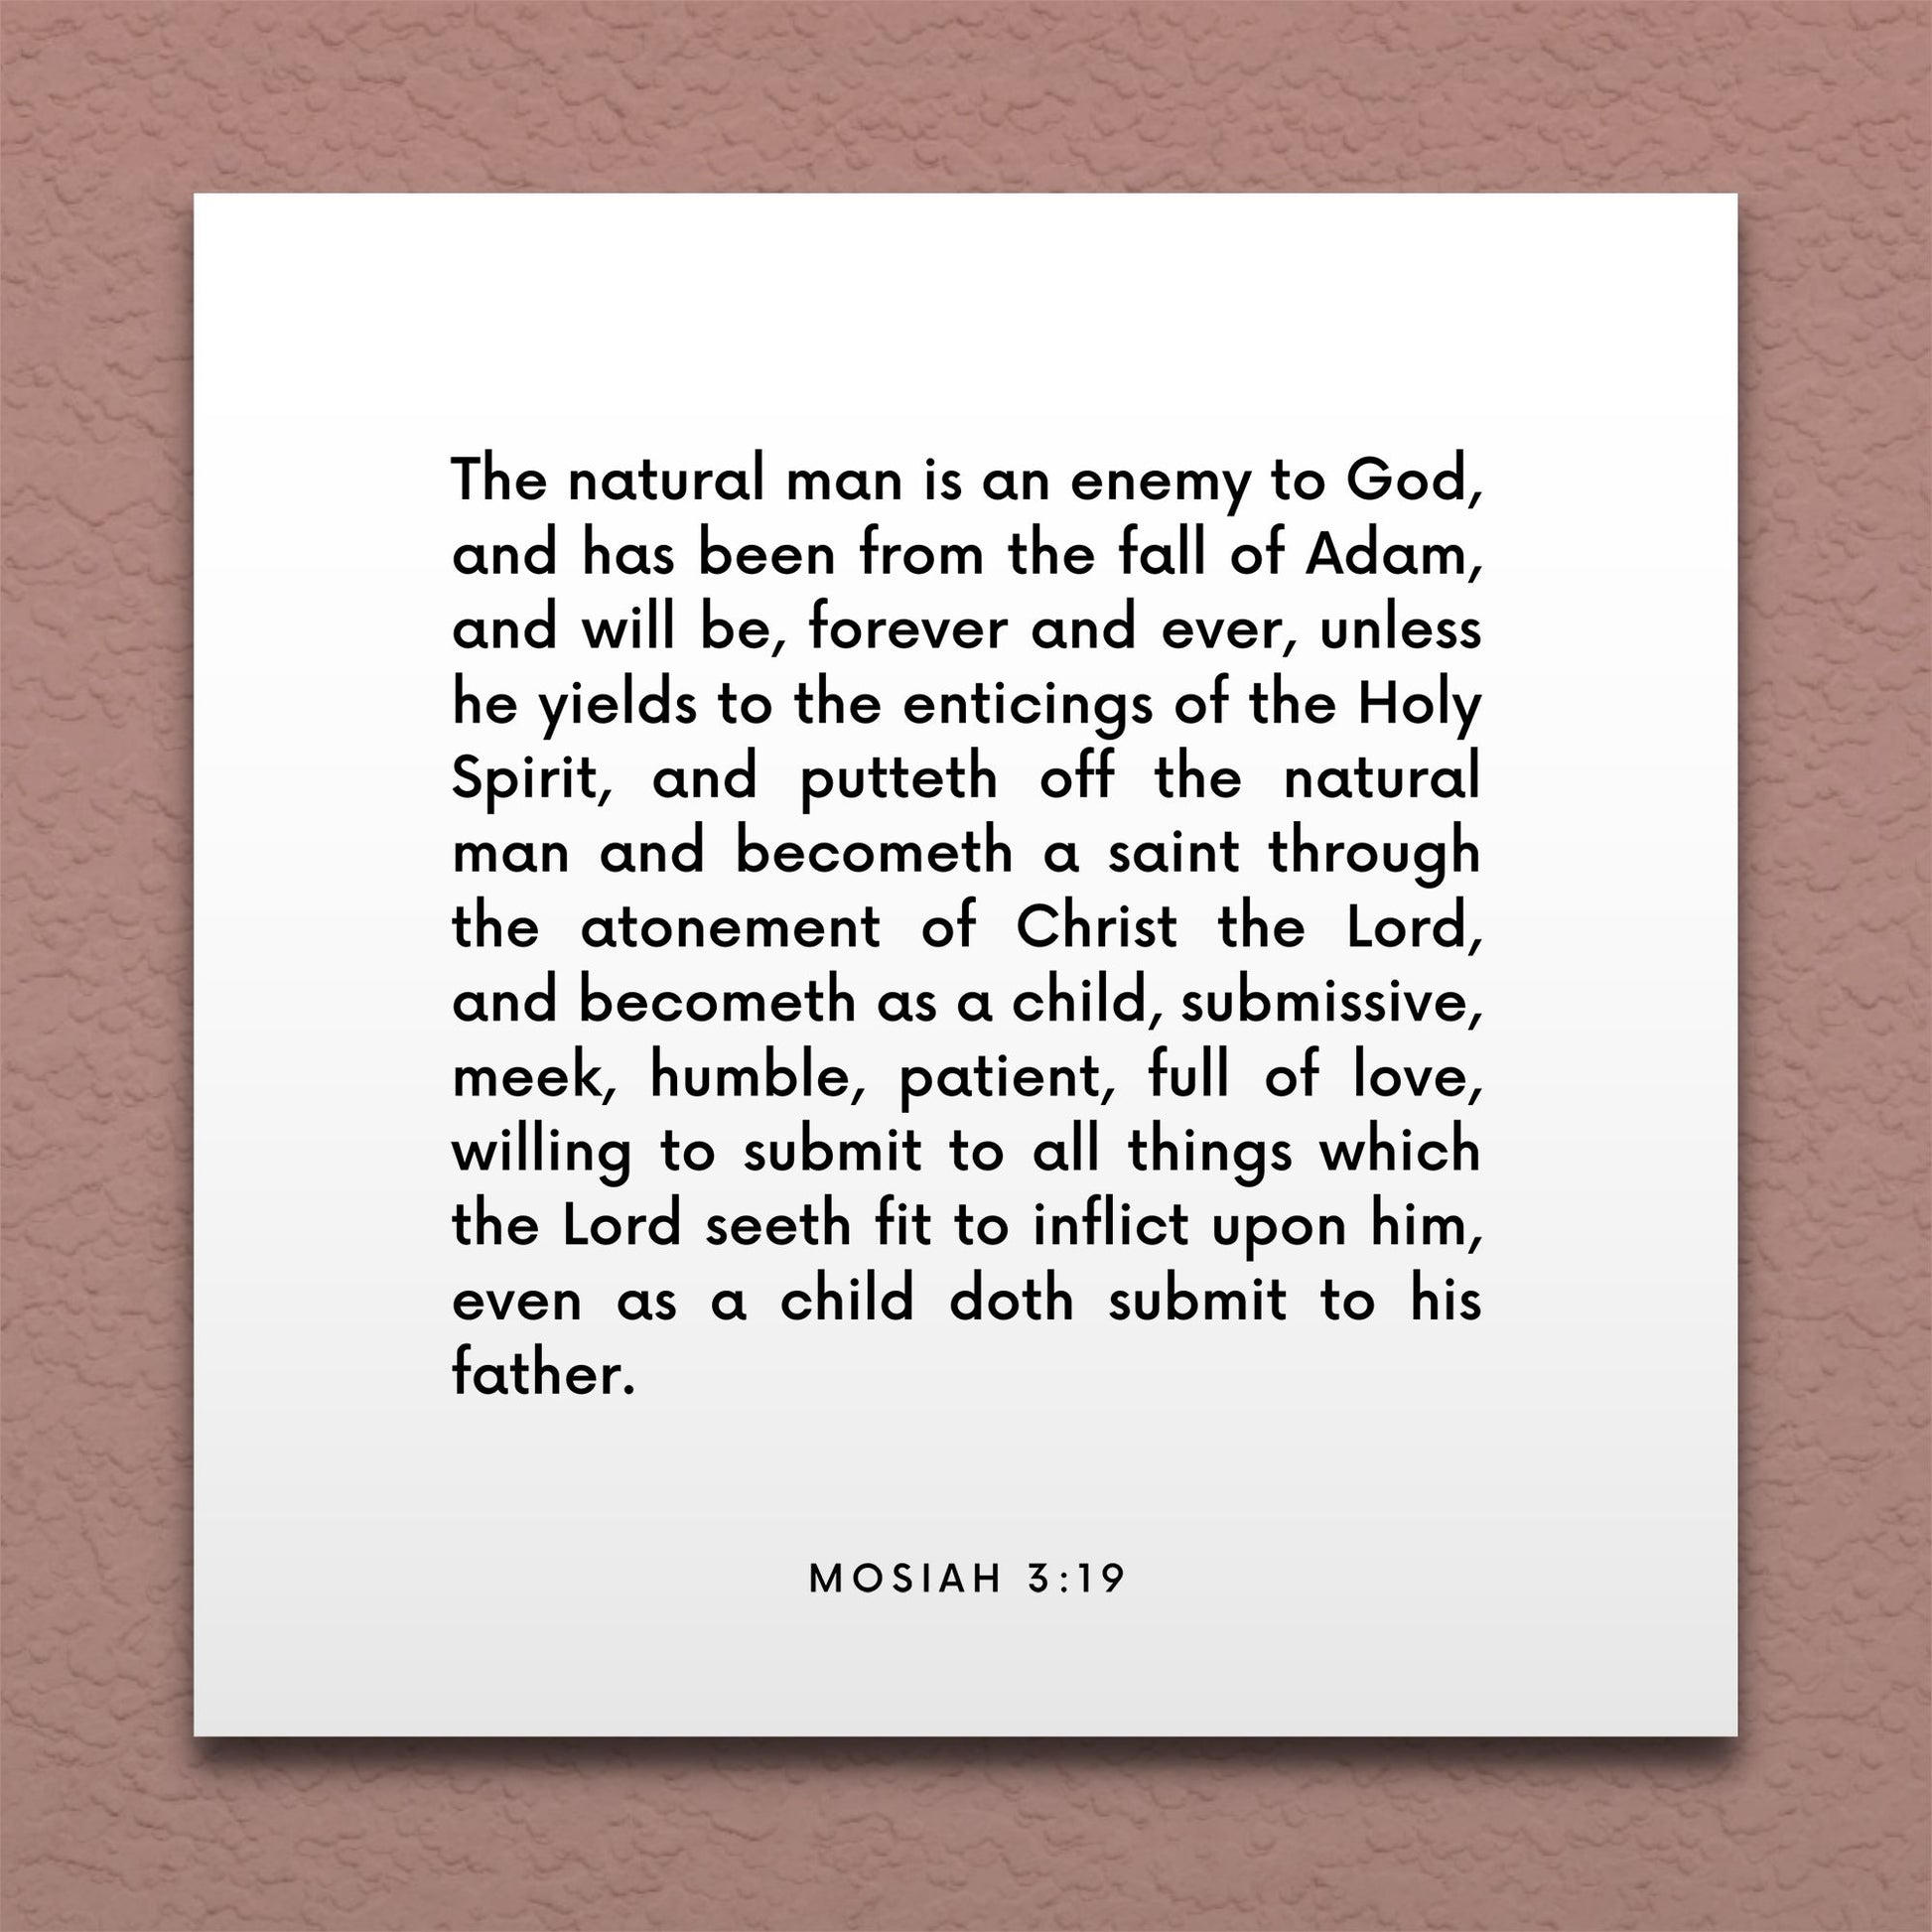 Wall-mounted scripture tile for Mosiah 3:19 - "The natural man is an enemy to God"